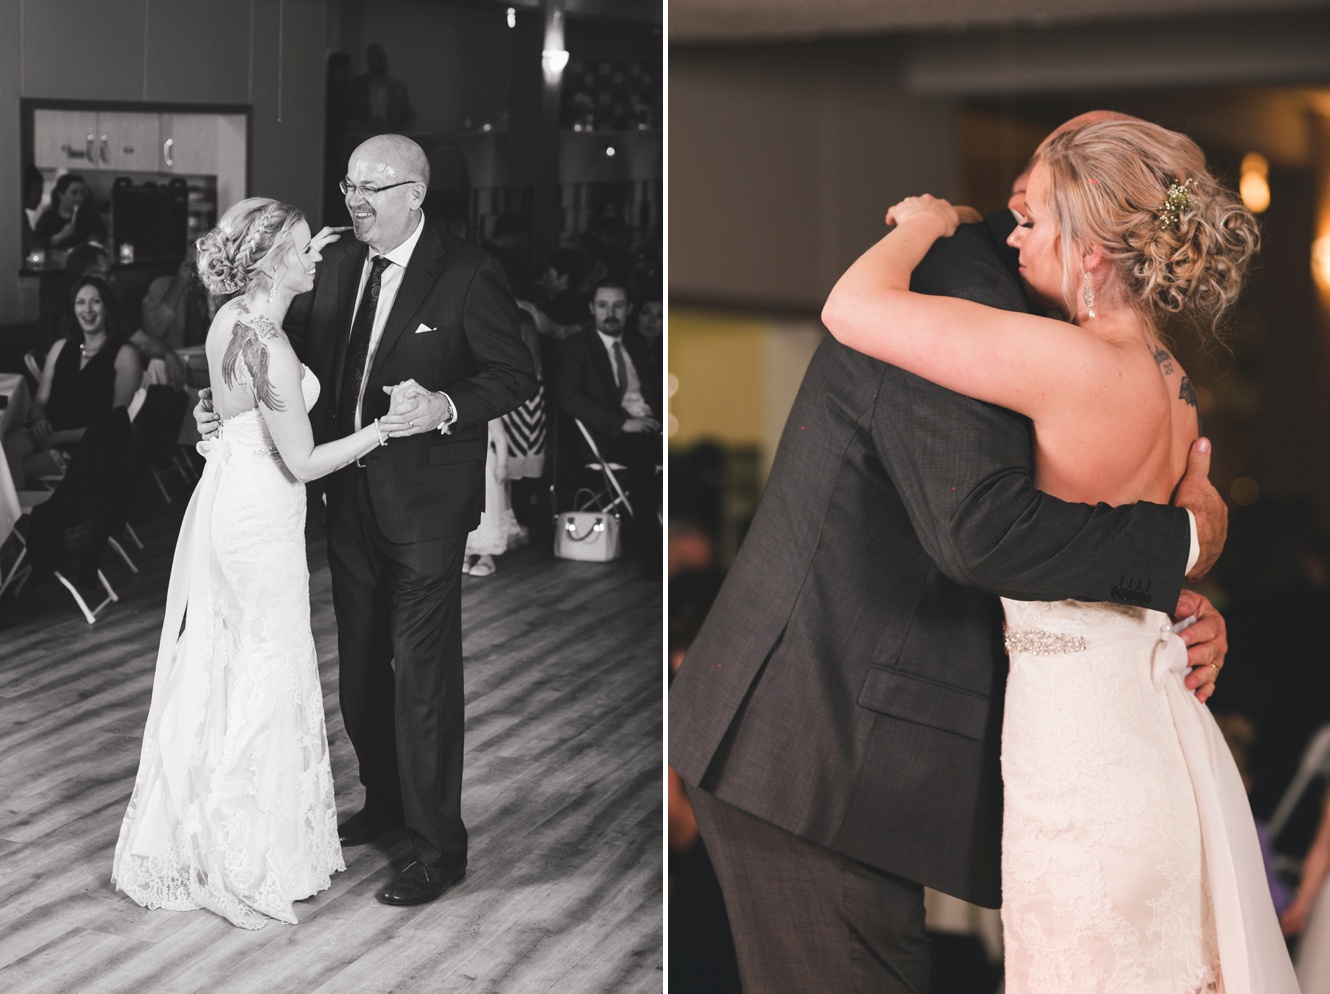 Father daughter wedding dance photo